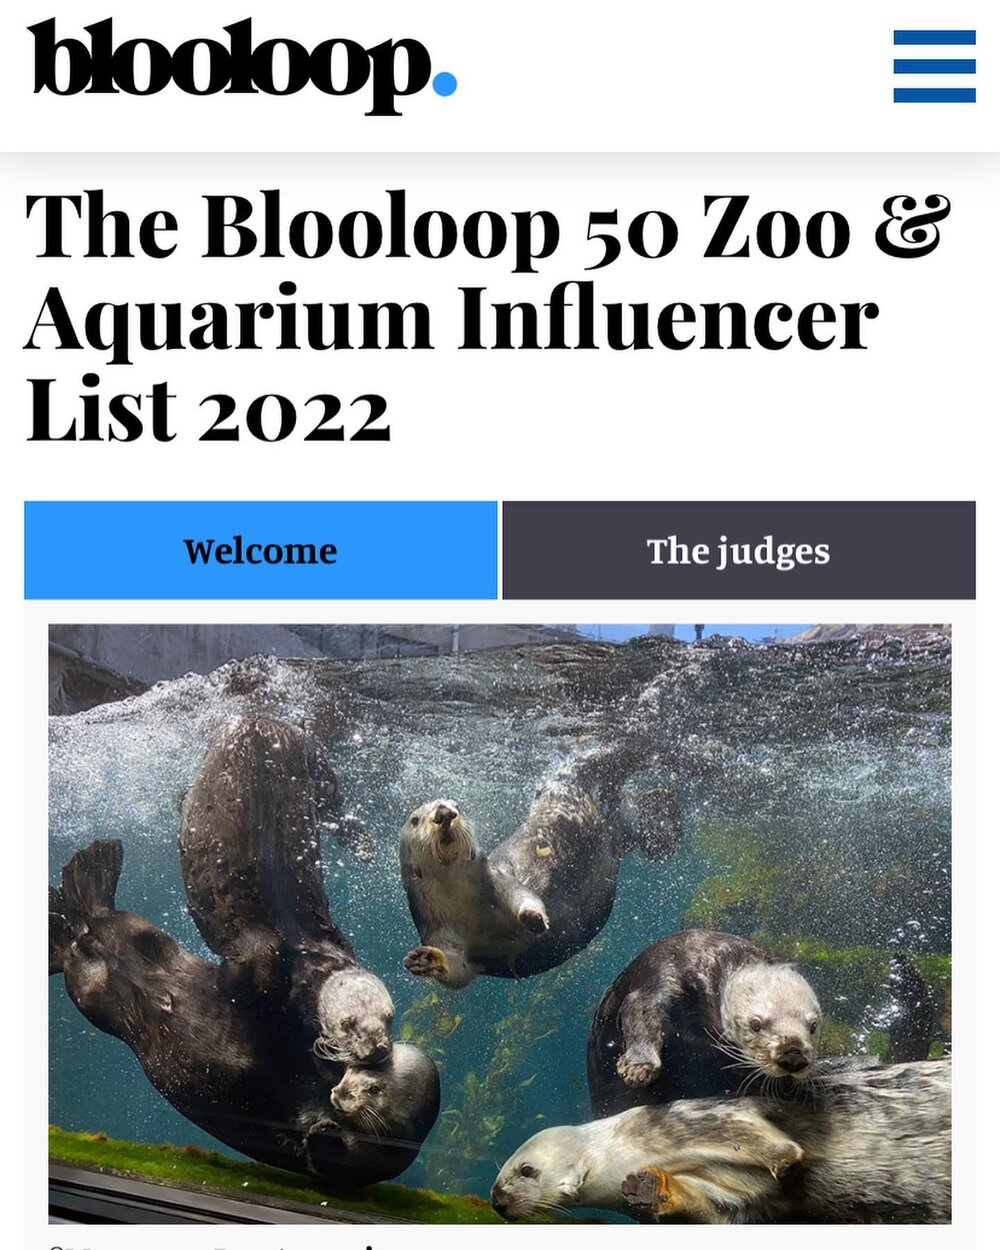 Am I shamelessly sharing this post in the hopes that you will nominate me for the Blooloop 50 Zoo and Aquarium Influencer List 2022? Yes. Do it you cowards.

Alternatively, nominate someone else! I&rsquo;ve already nominated @connorljd and @theonlyja